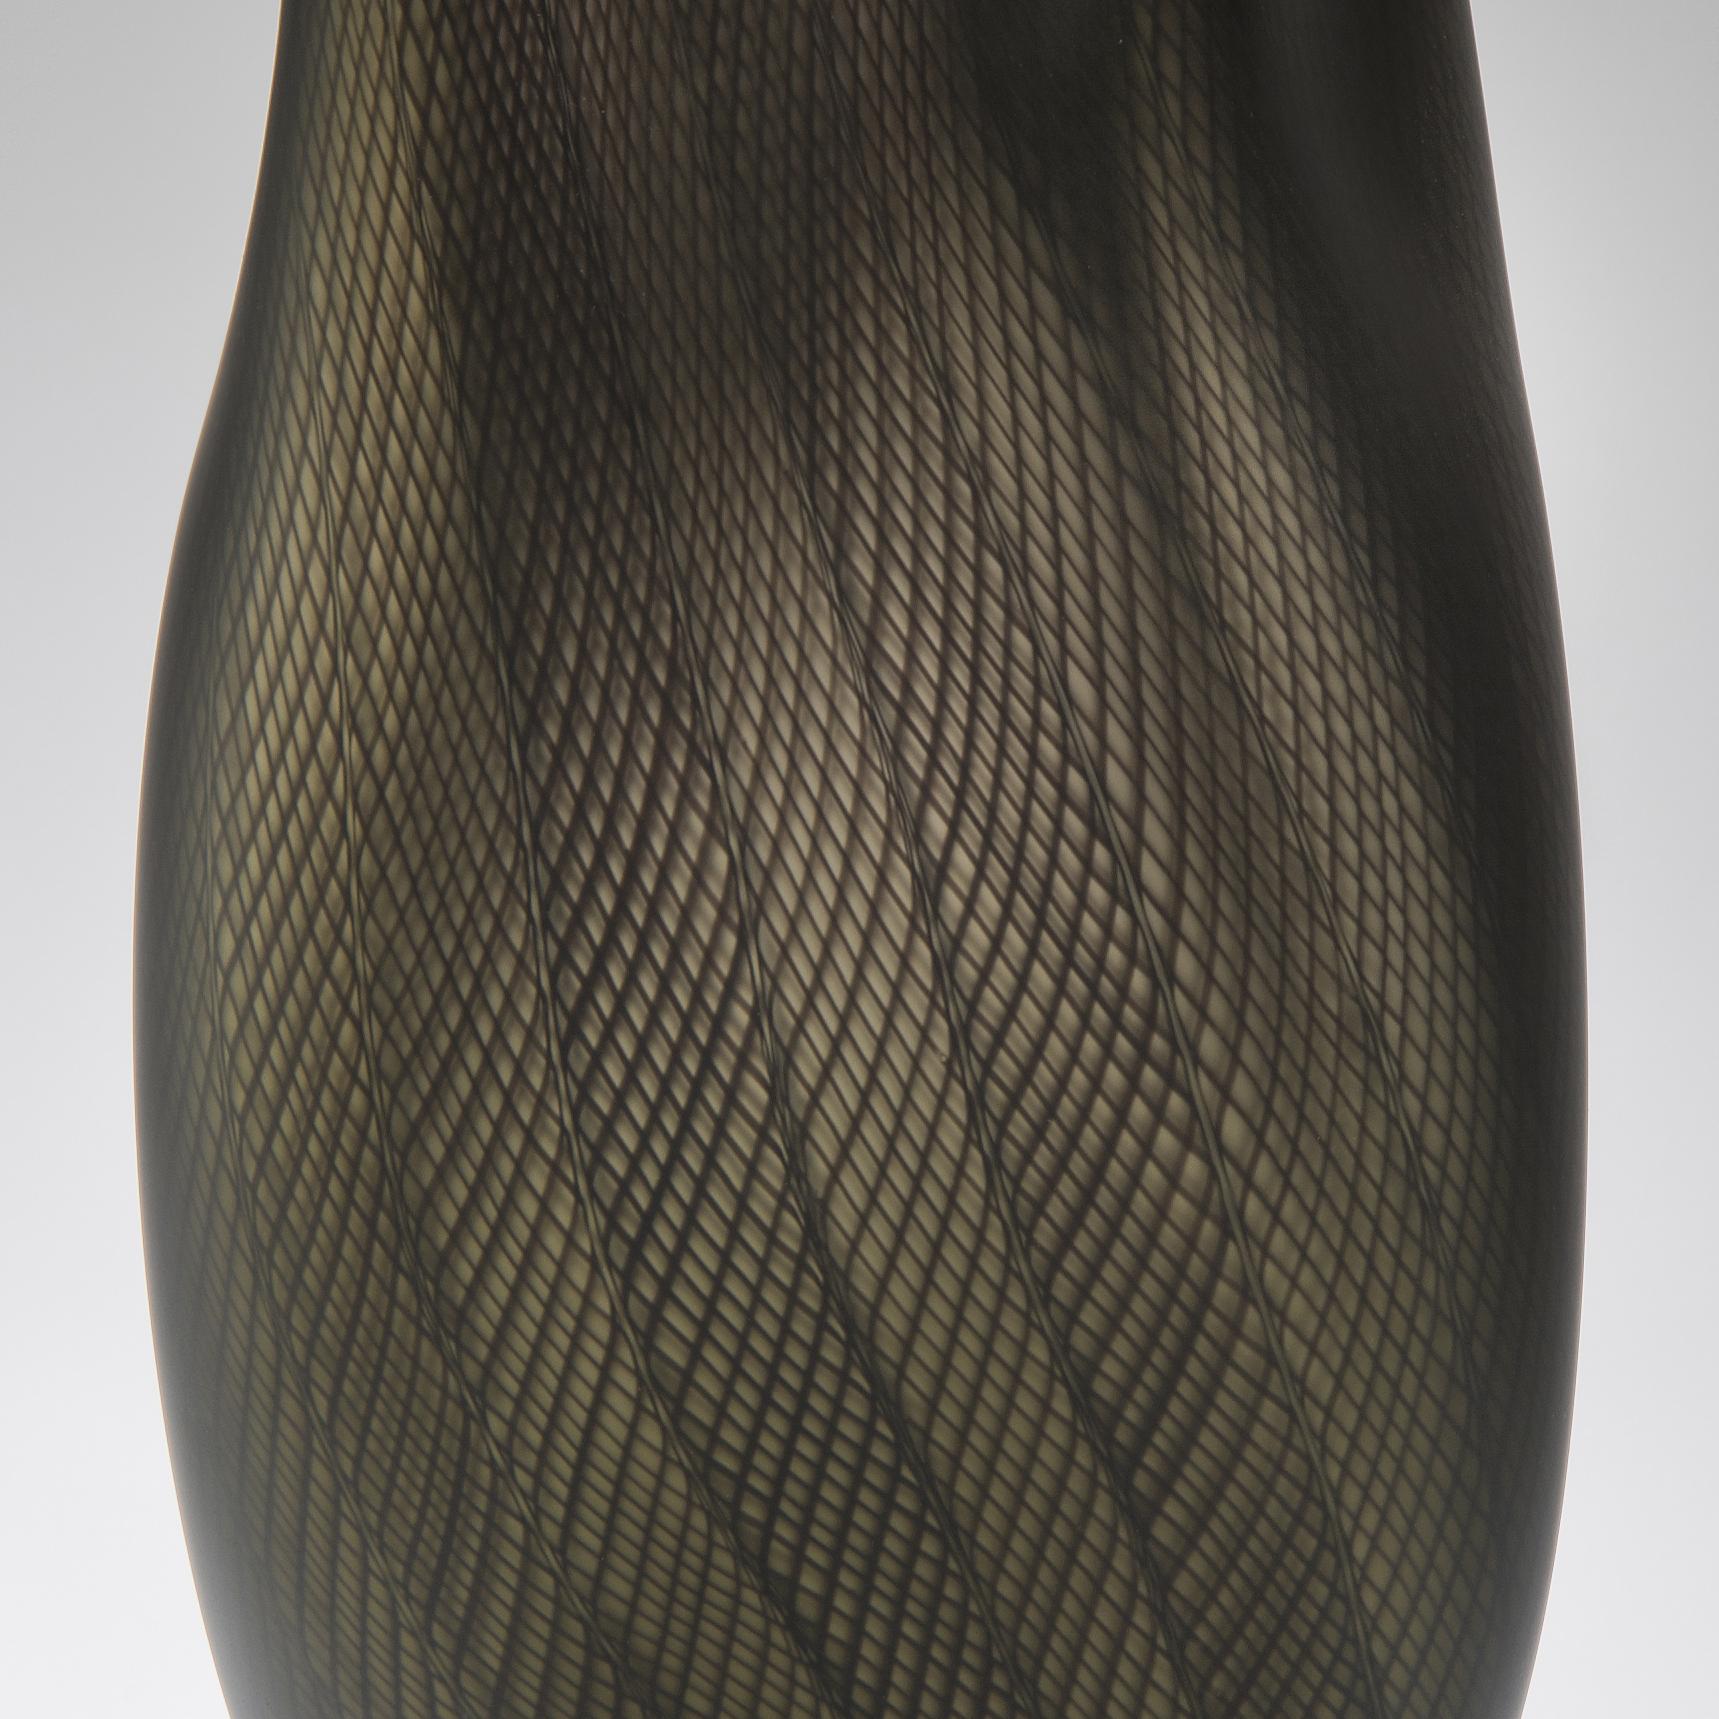 Hand-Crafted Stratiform Aes Zanfirico 001, a Unique Bronze Glass Sculpture by Liam Reeves